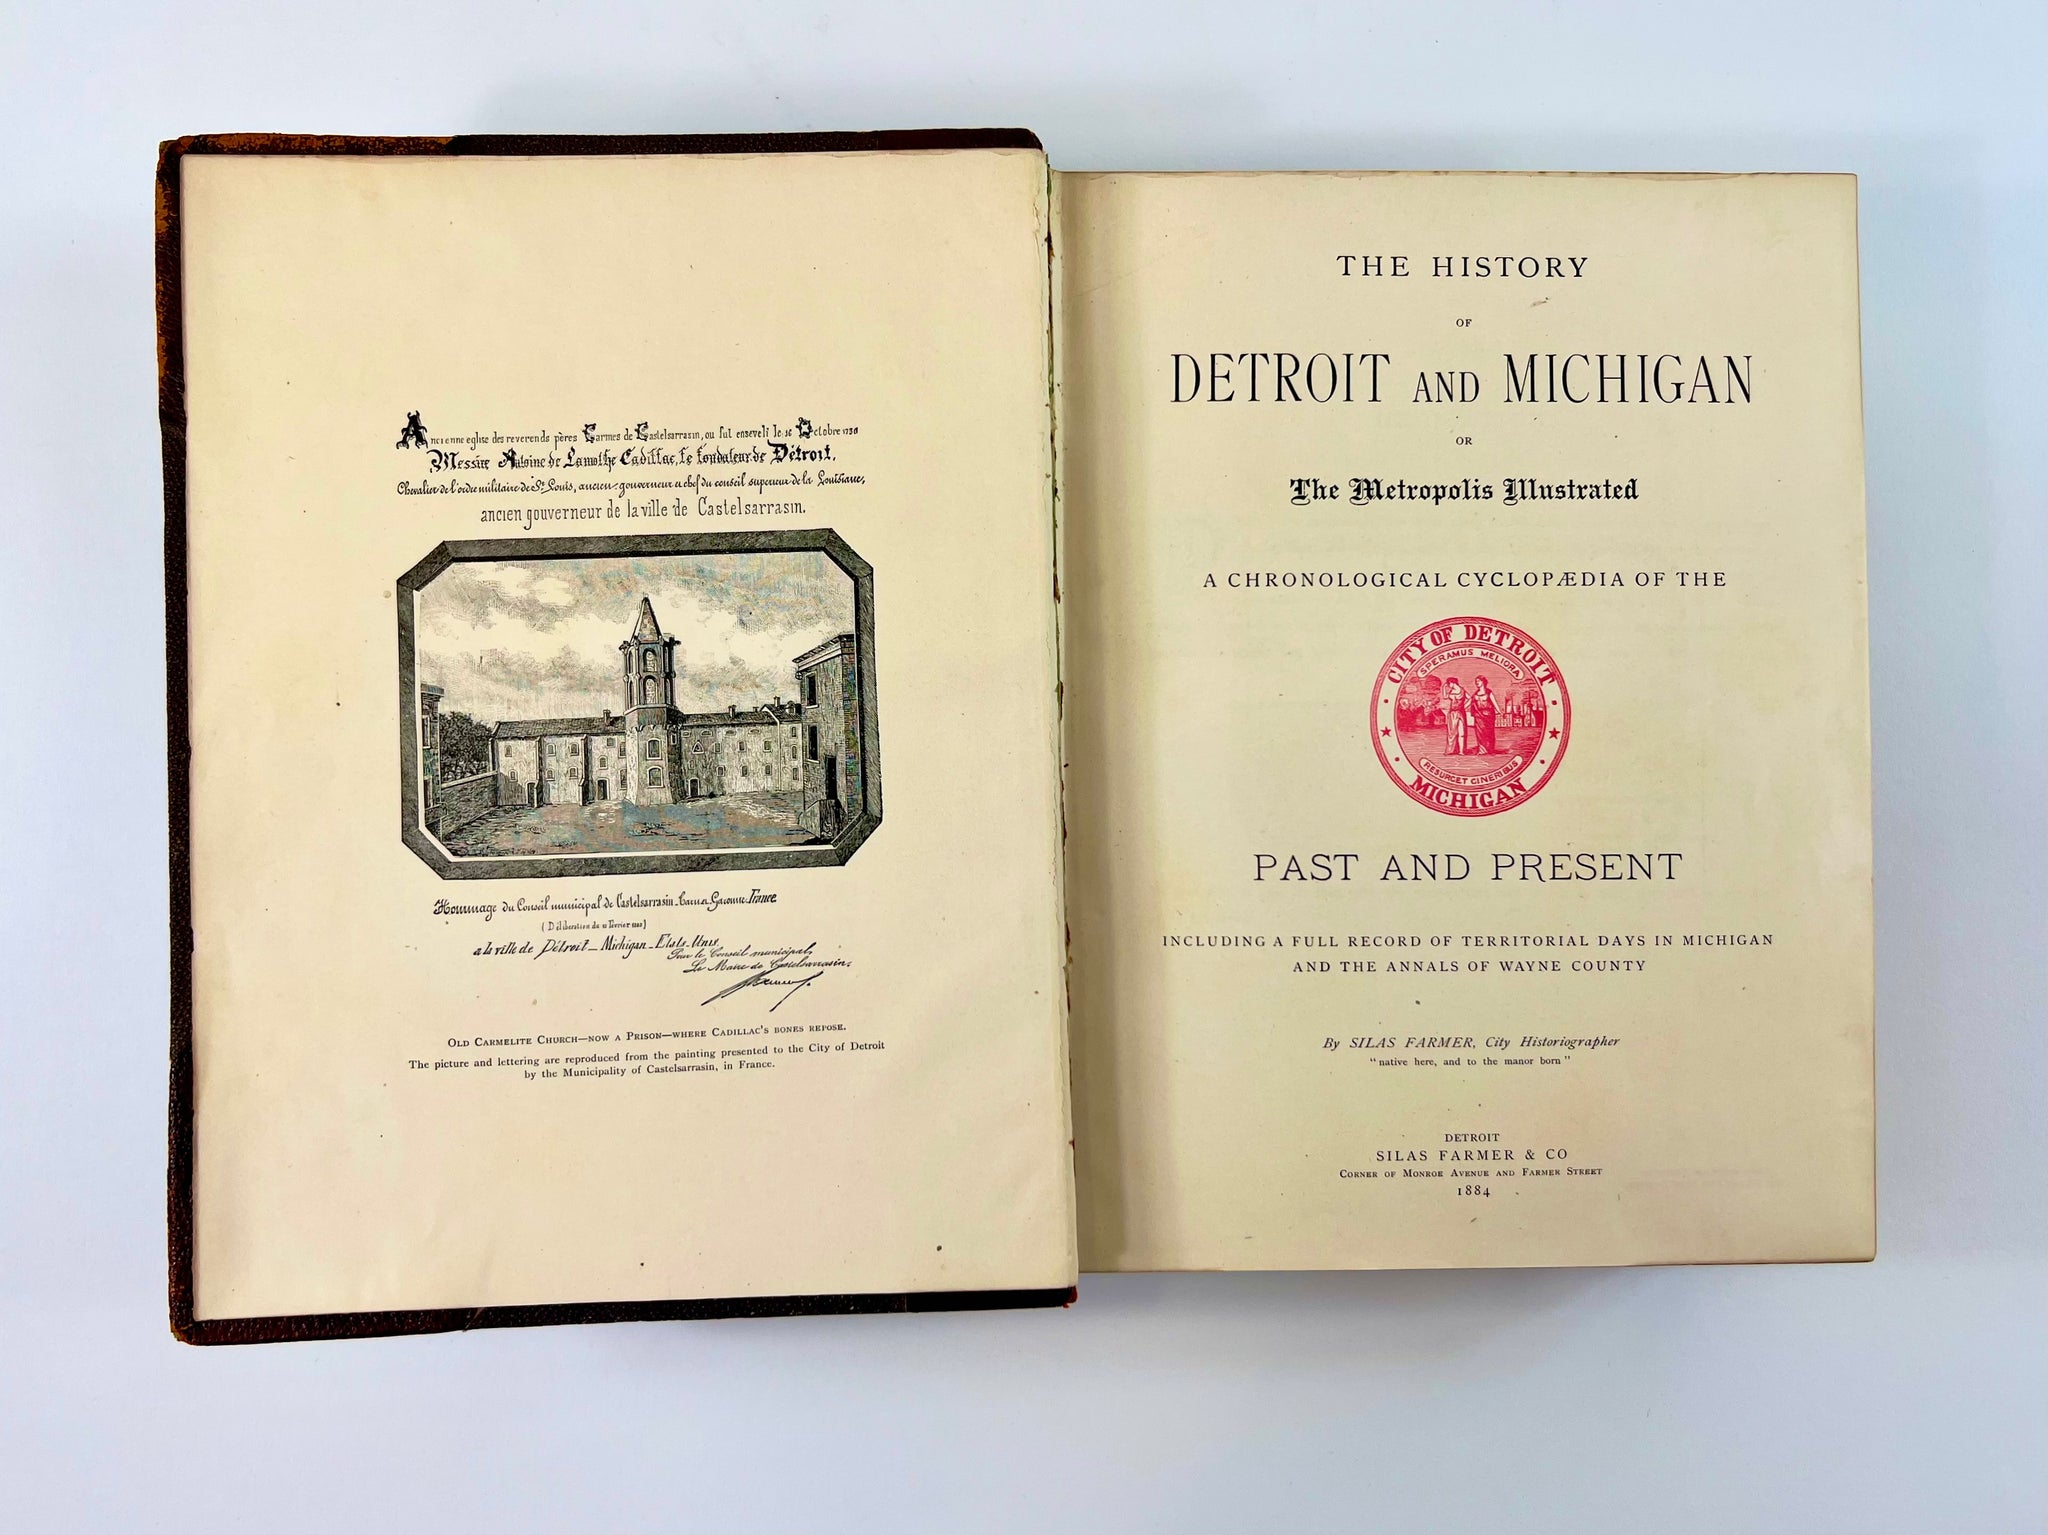 FARMER, Silas. The History of Detroit and Michigan.